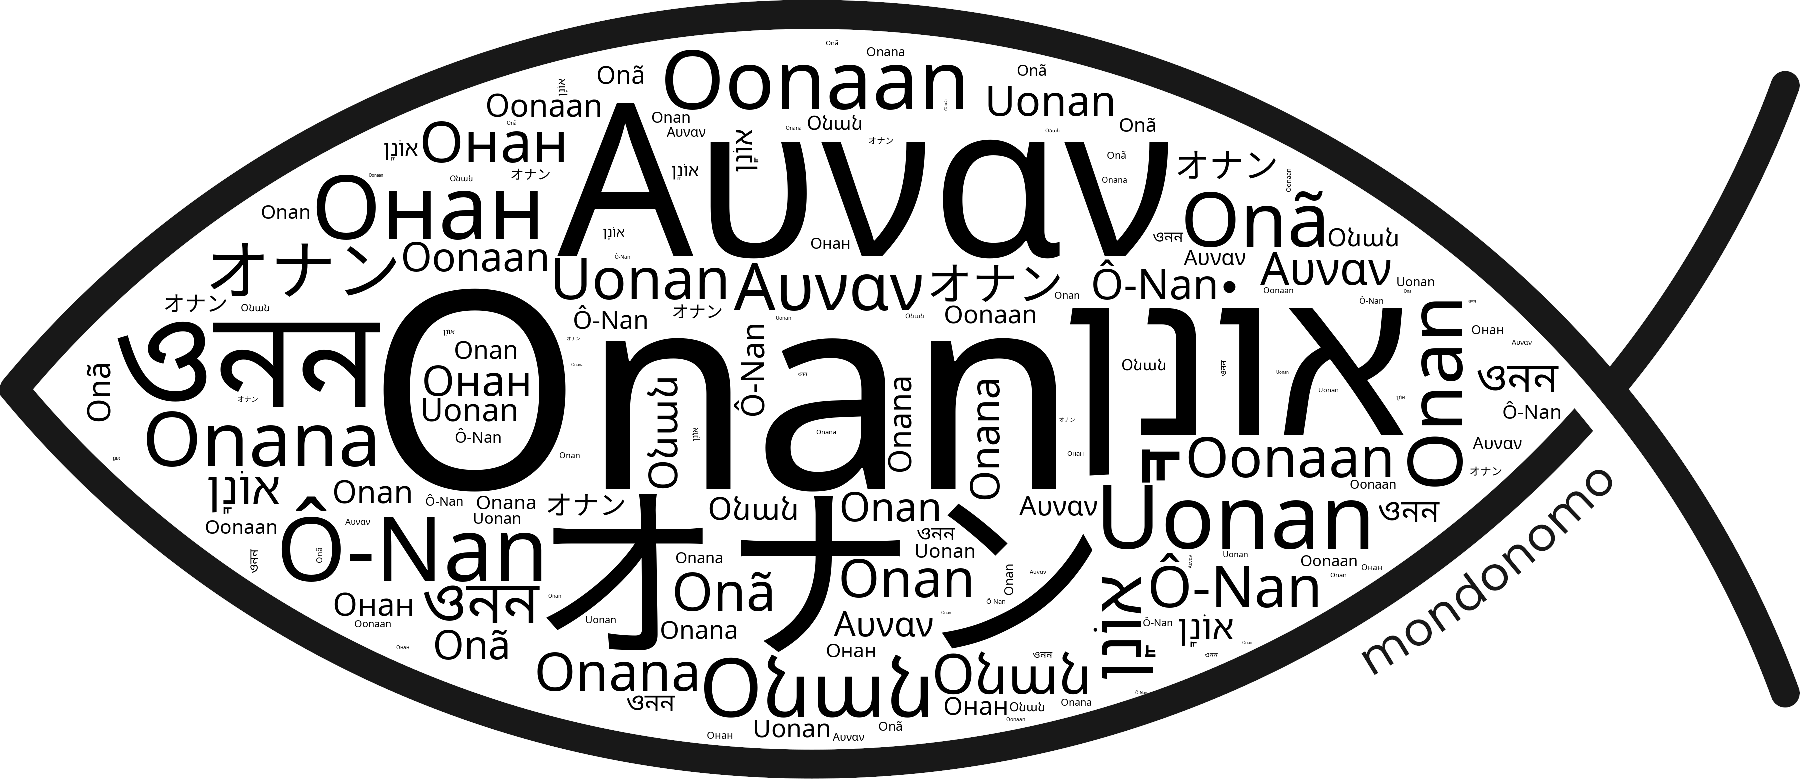 Name Onan in the world's Bibles